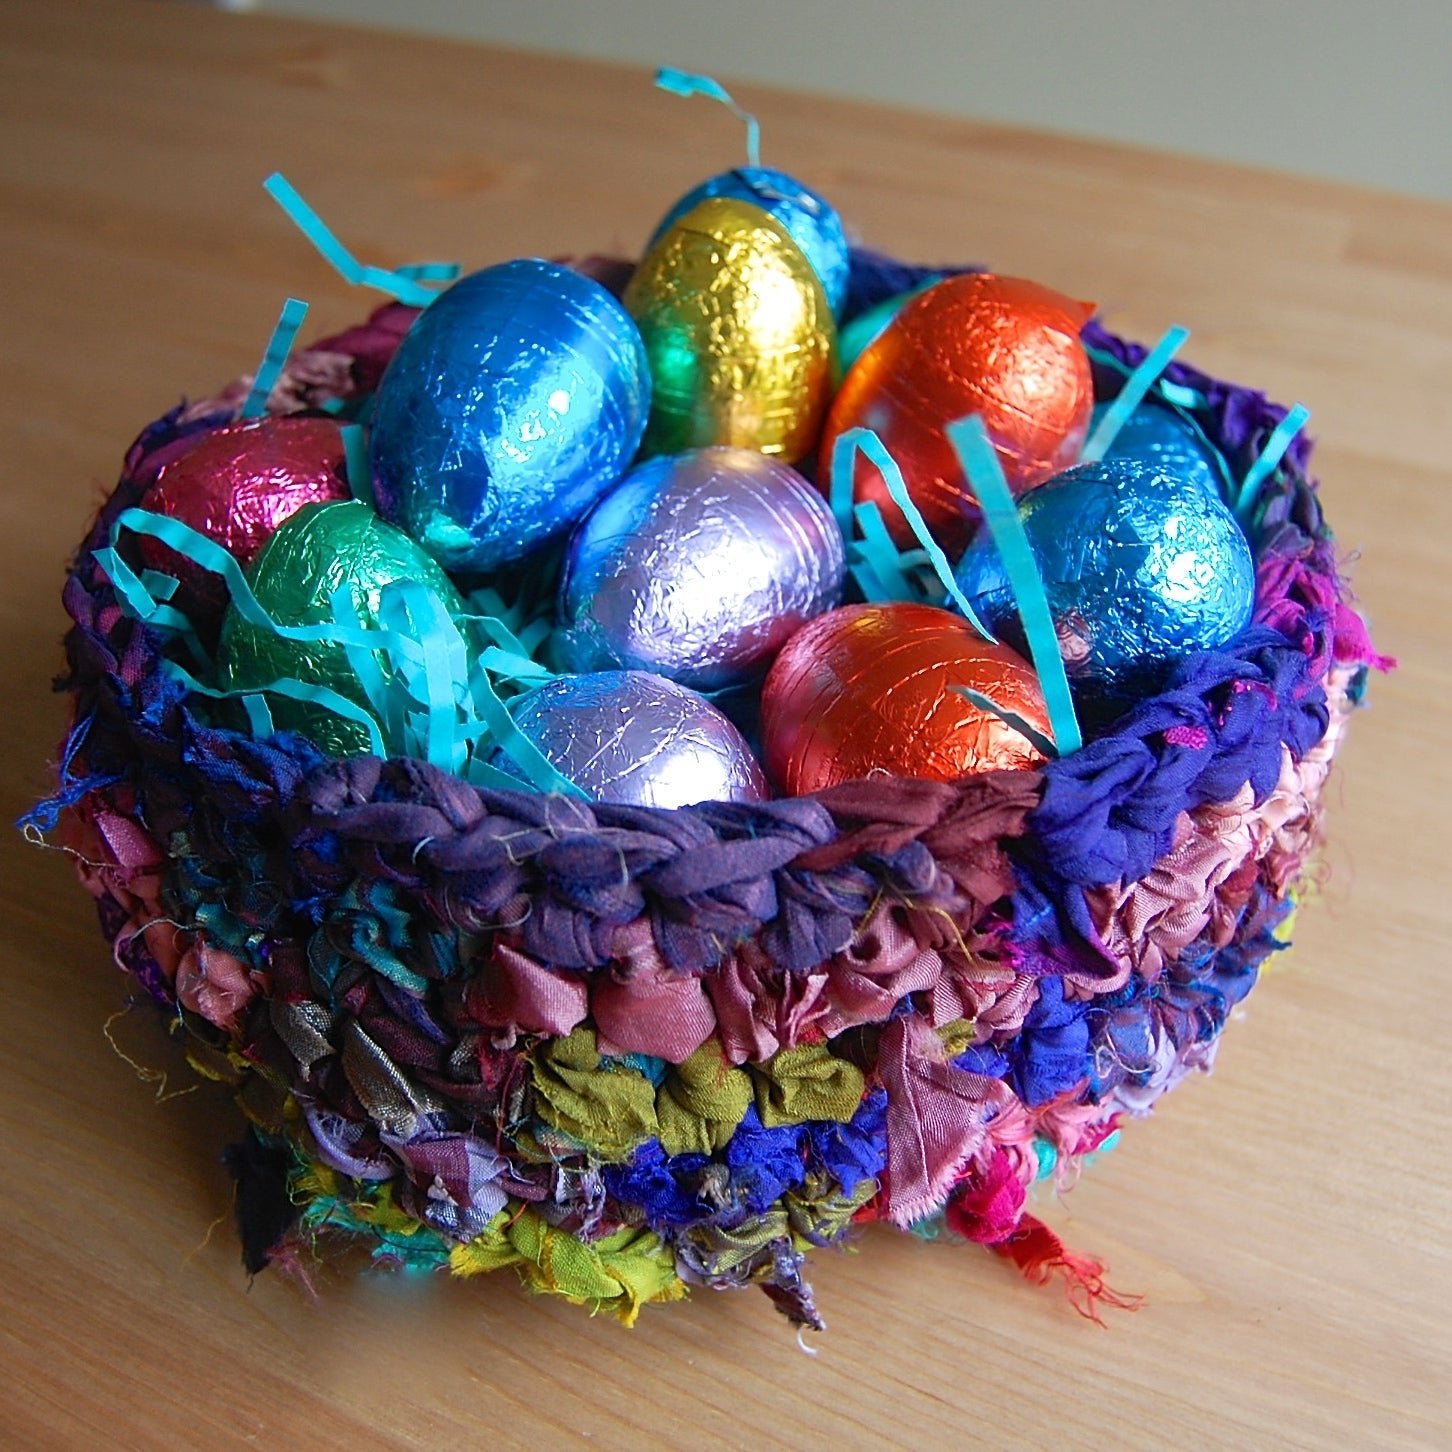 Unique Easter Basket Filler Ideas the Whole Family Will Love - Darn Good Yarn